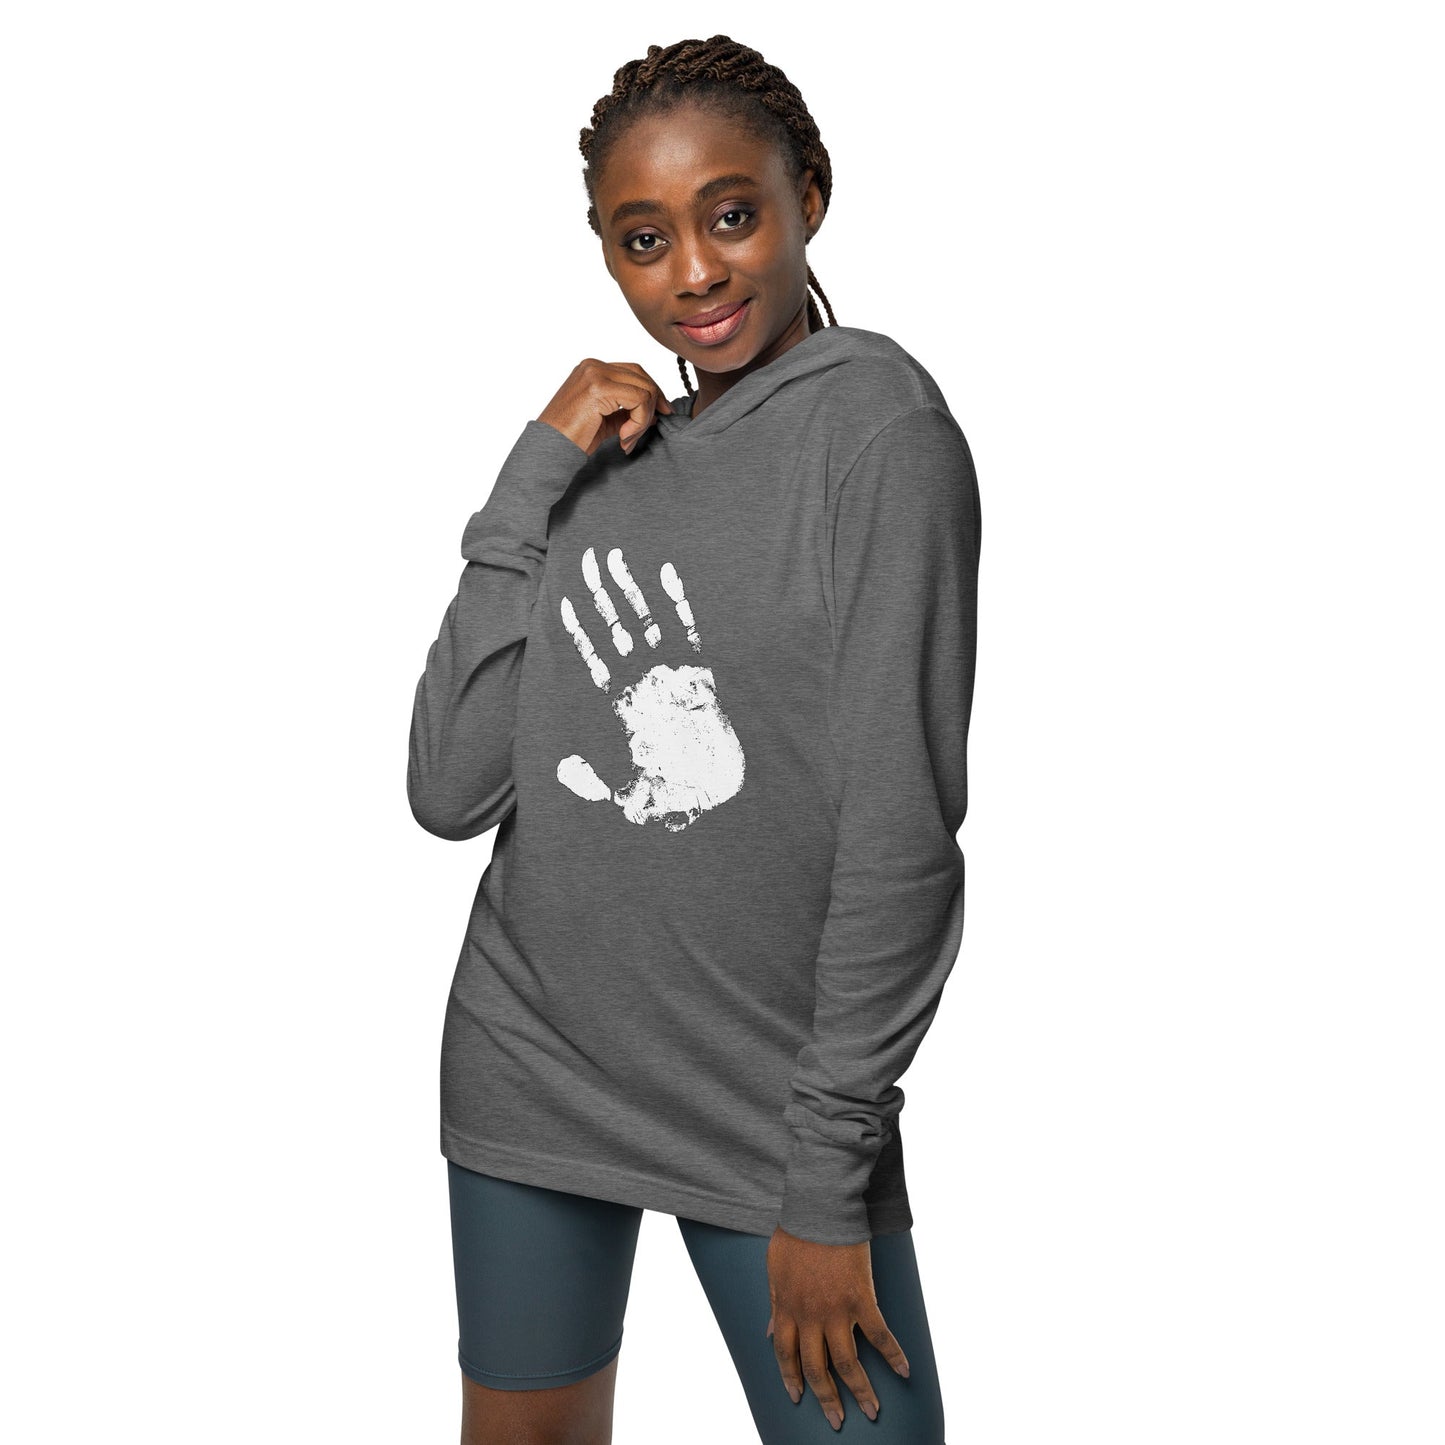 Promises - Unisex Hooded Long-Sleeve Tee - Souled Out World